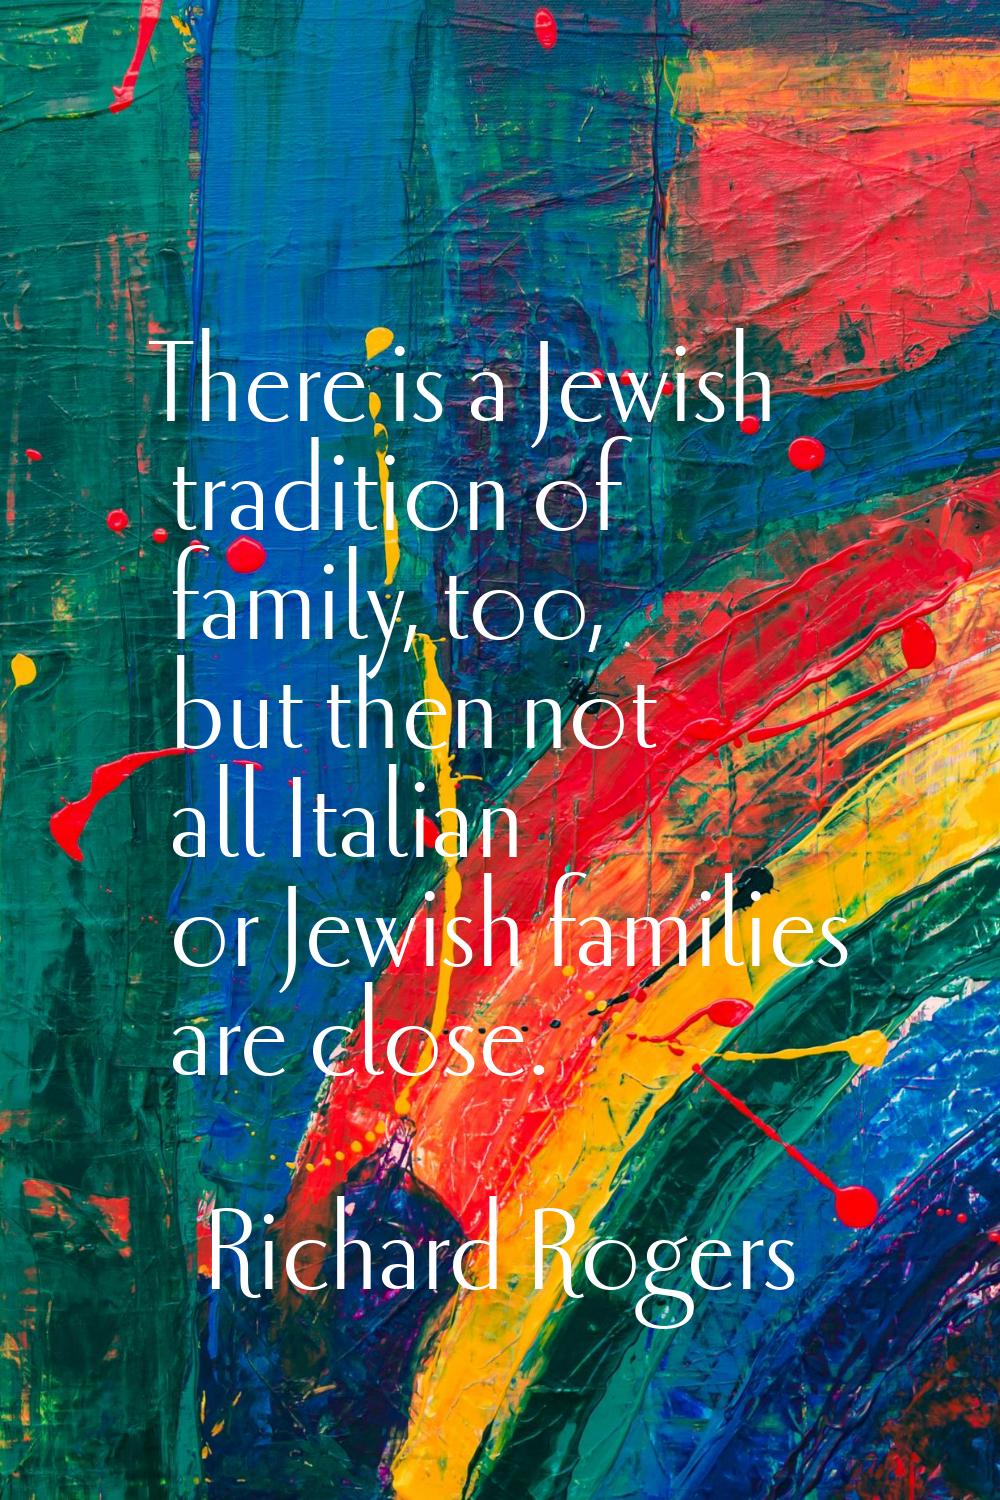 There is a Jewish tradition of family, too, but then not all Italian or Jewish families are close.